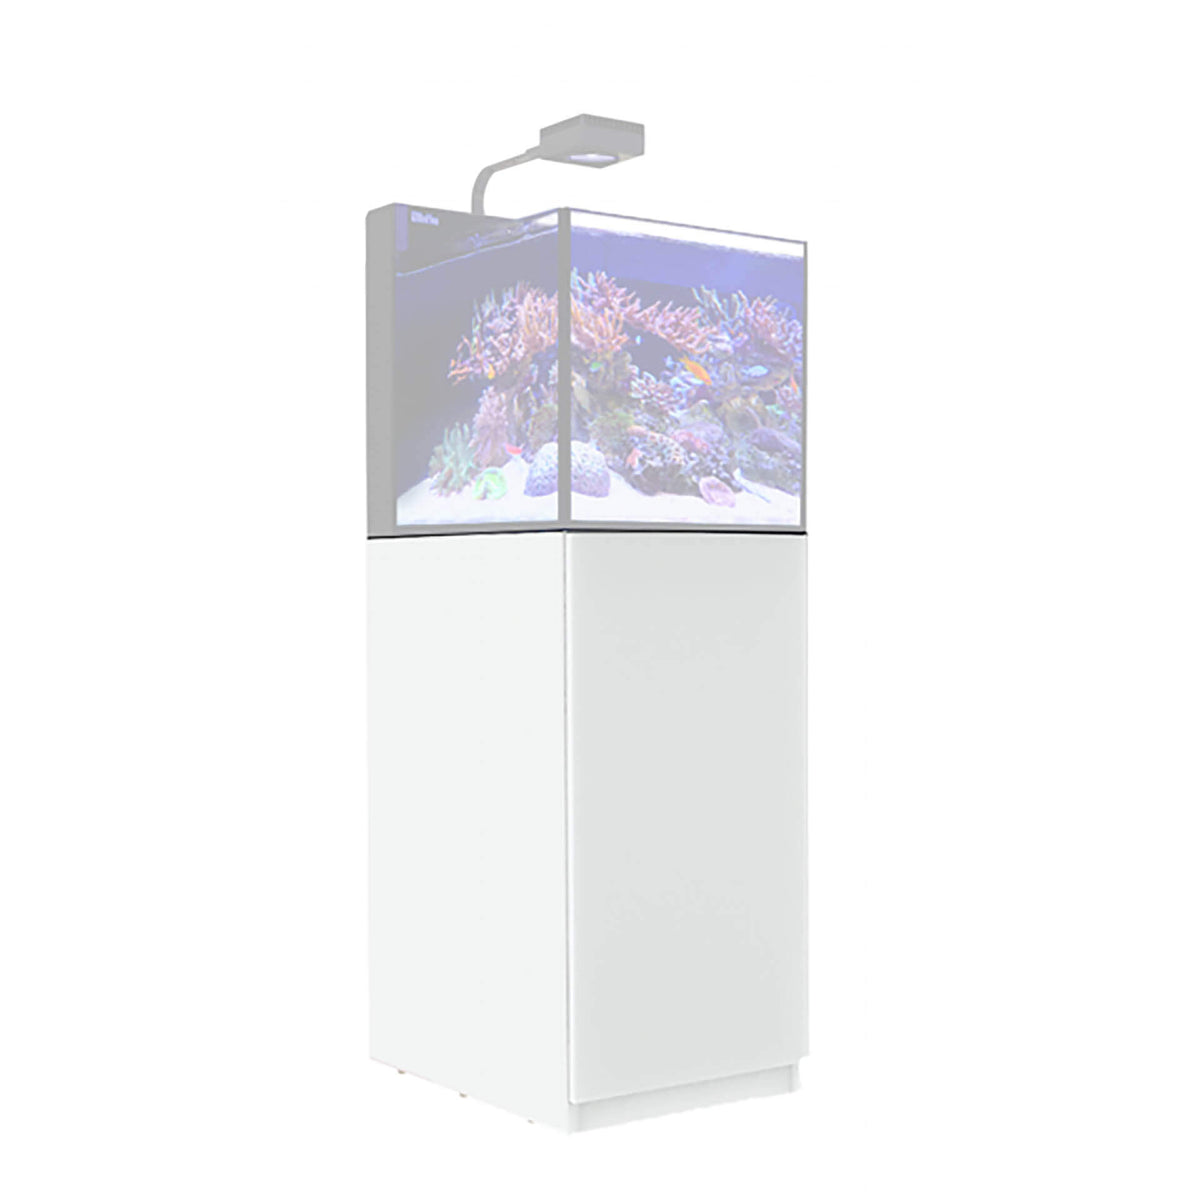 Red Sea Max Nano Peninsula Cabinet - Black or White - In Store Pick Up Only